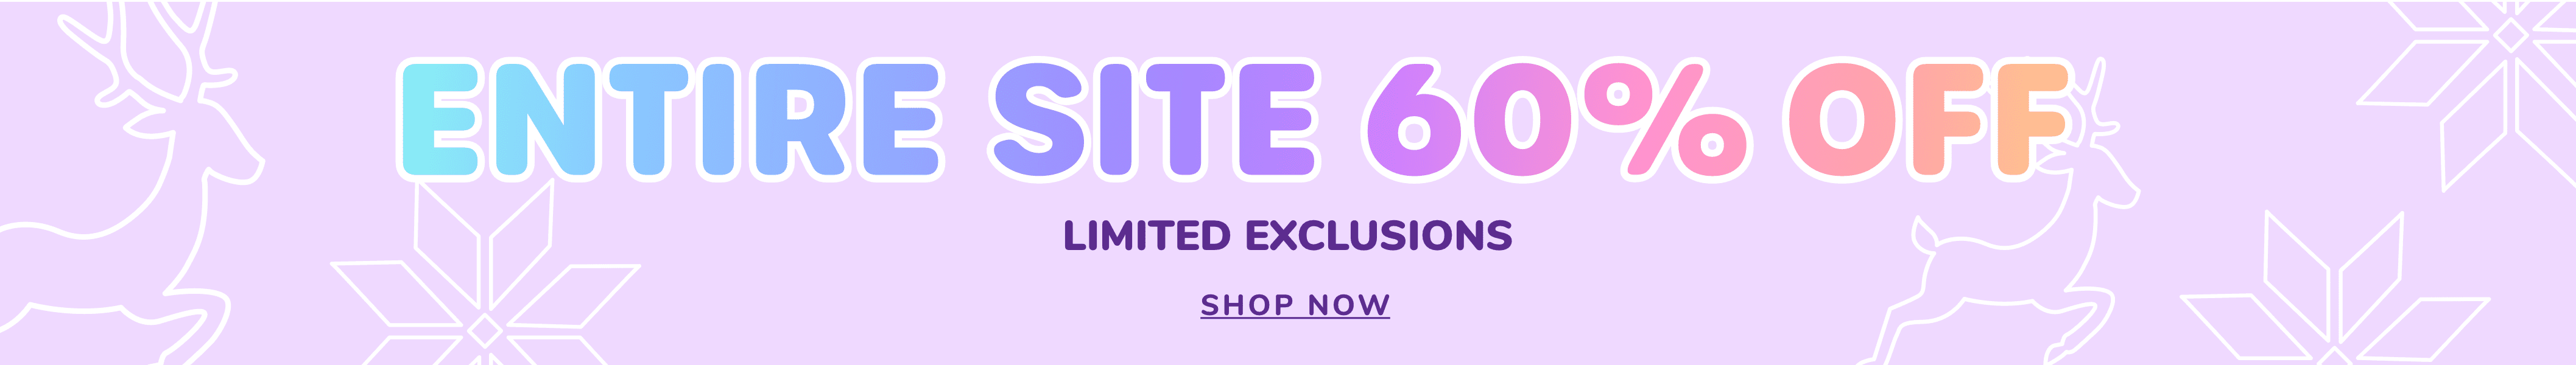 Entire Site 60 % OFF | LIMITED EXCLUSIONS